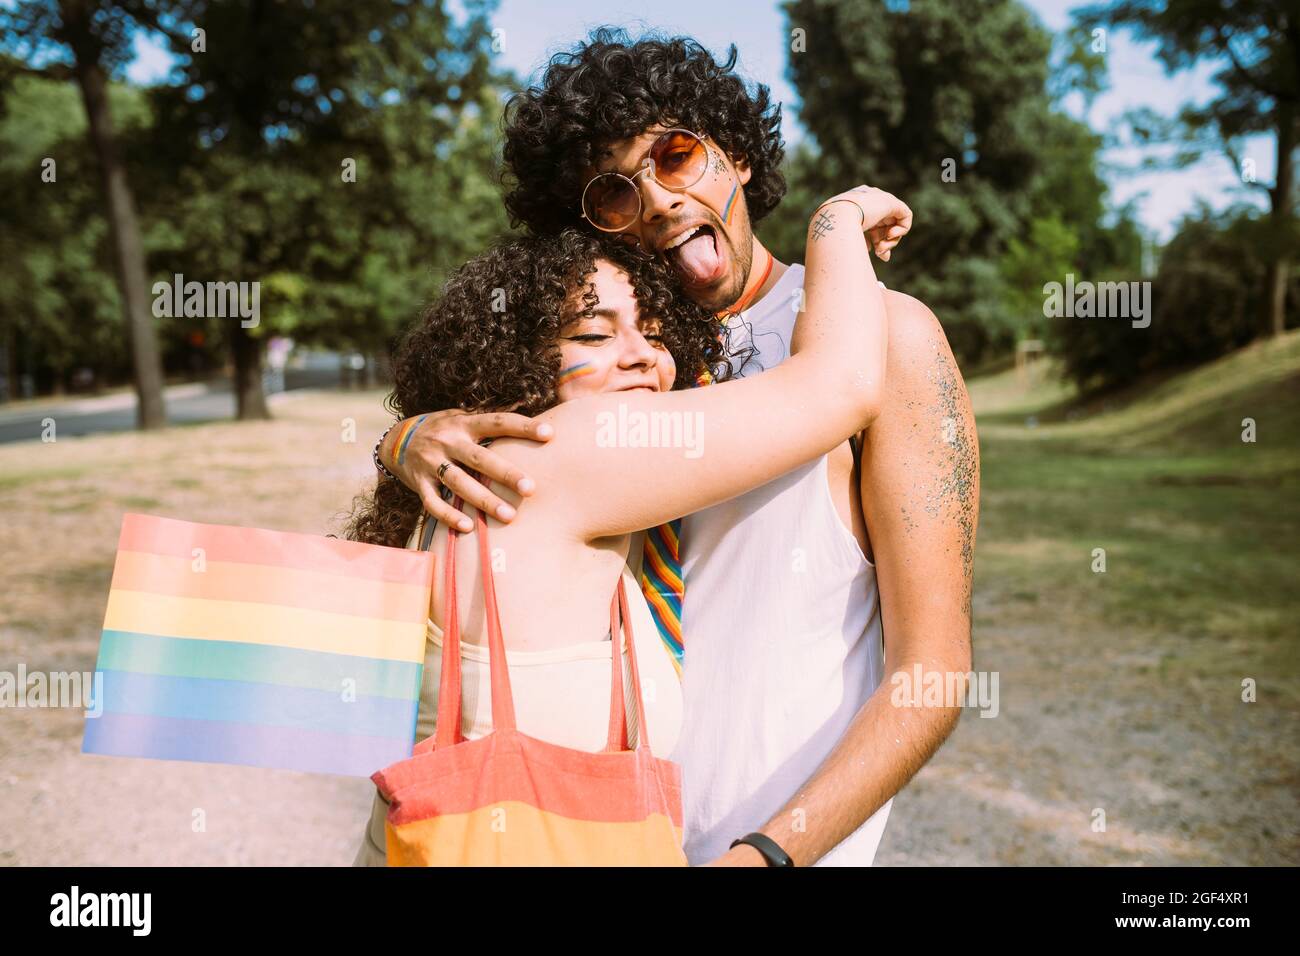 Young woman embracing man in park Stock Photo